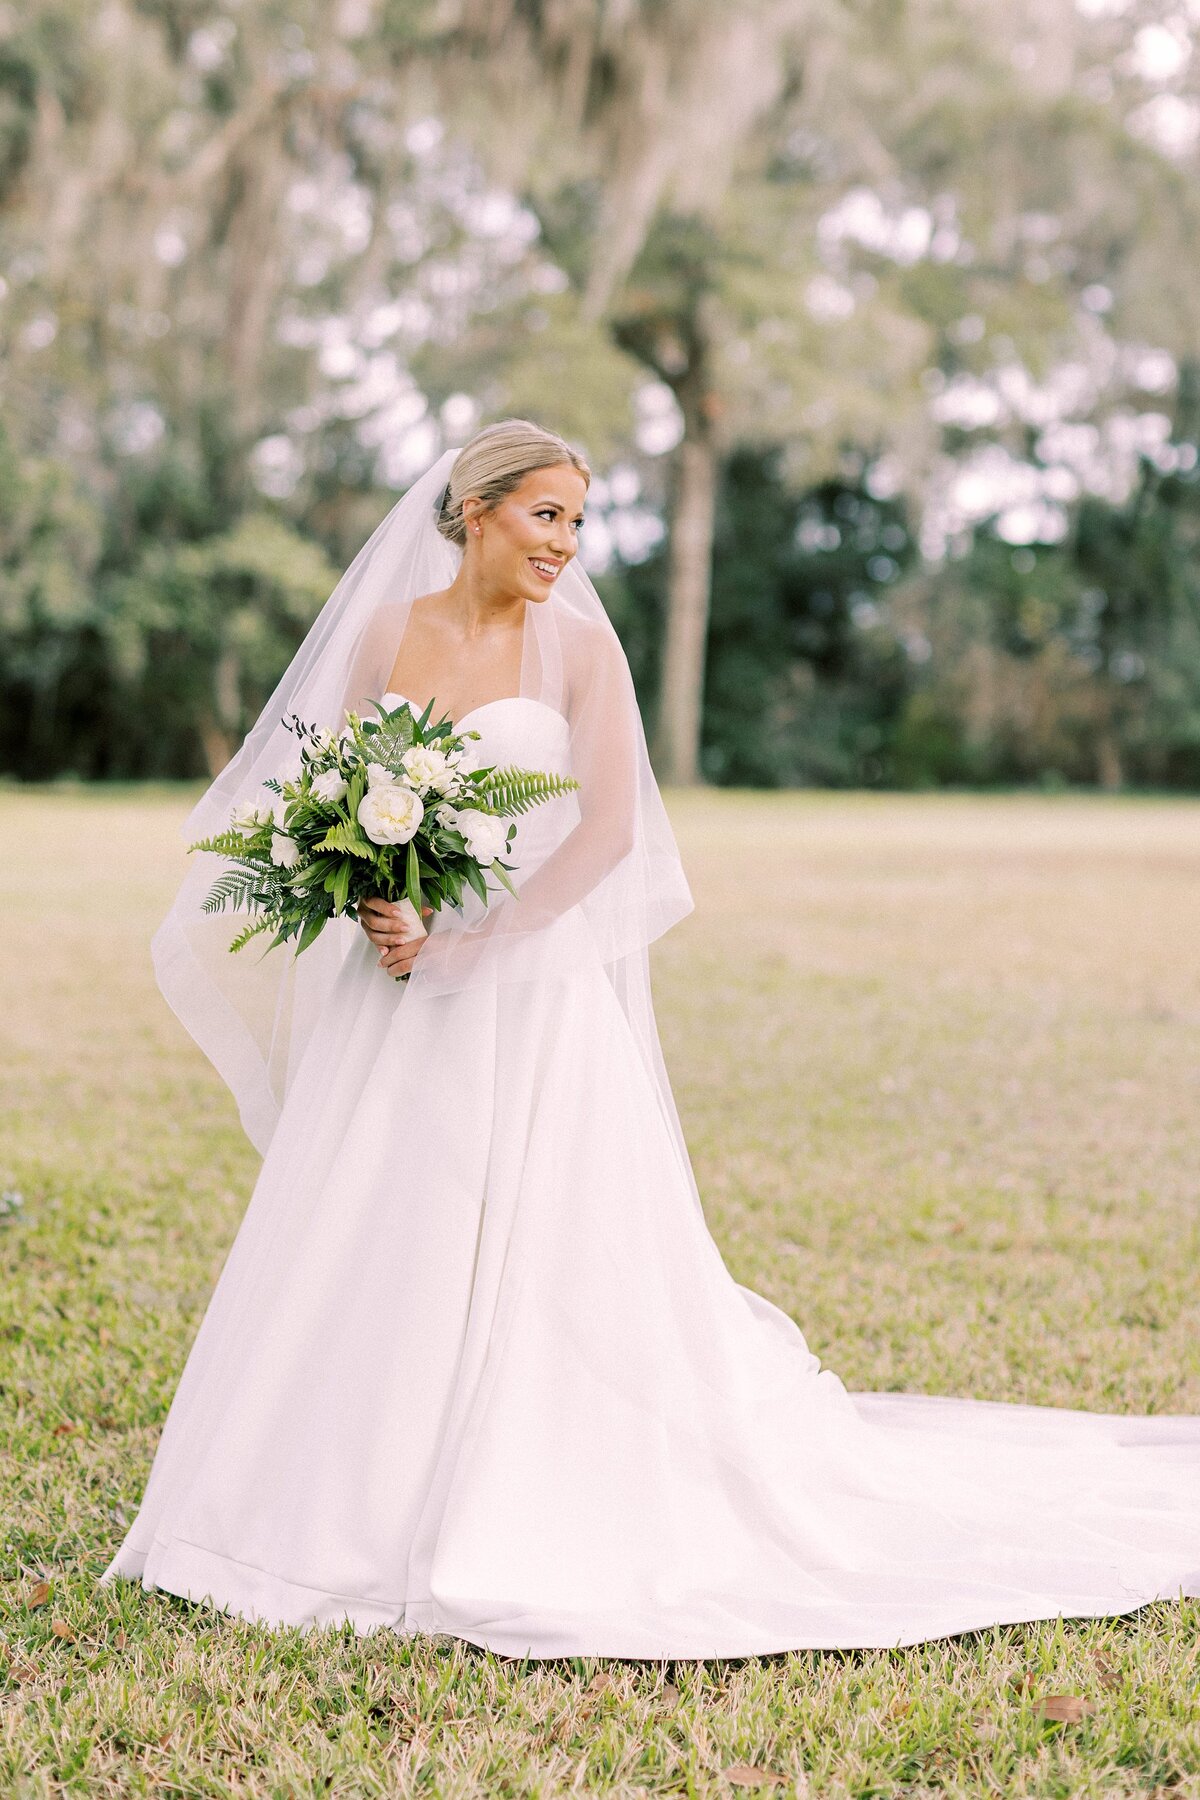 A wedding at Southwood in Tallahassee, FL - 6